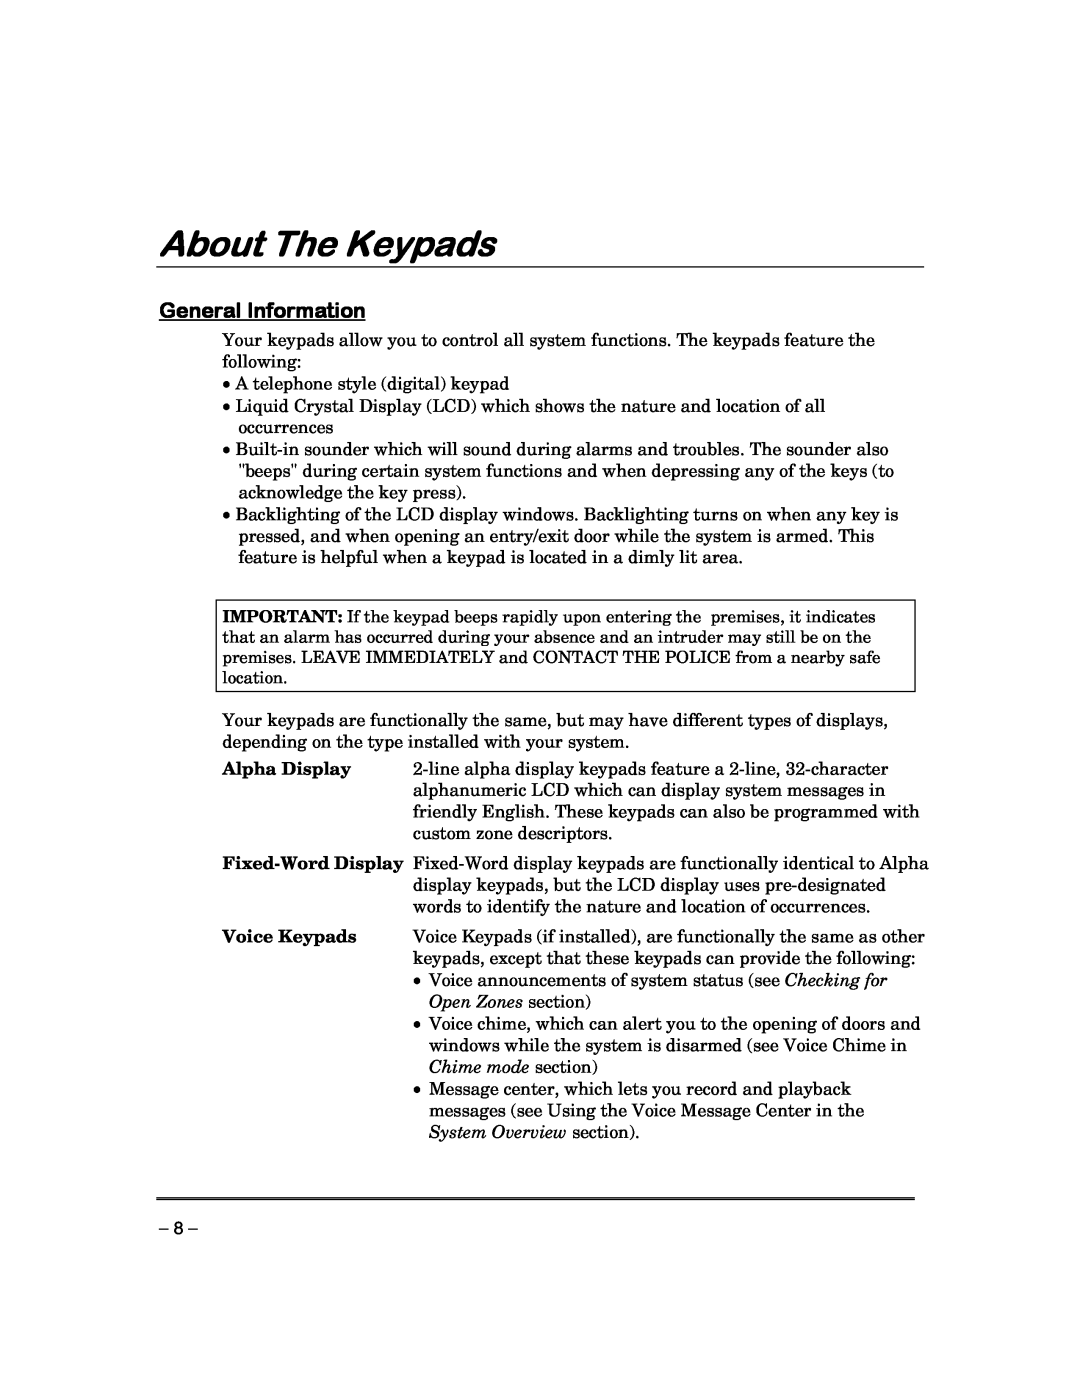 First Alert FA148CPSIA, FA168CPSSIA manual About The Keypads, General Information 